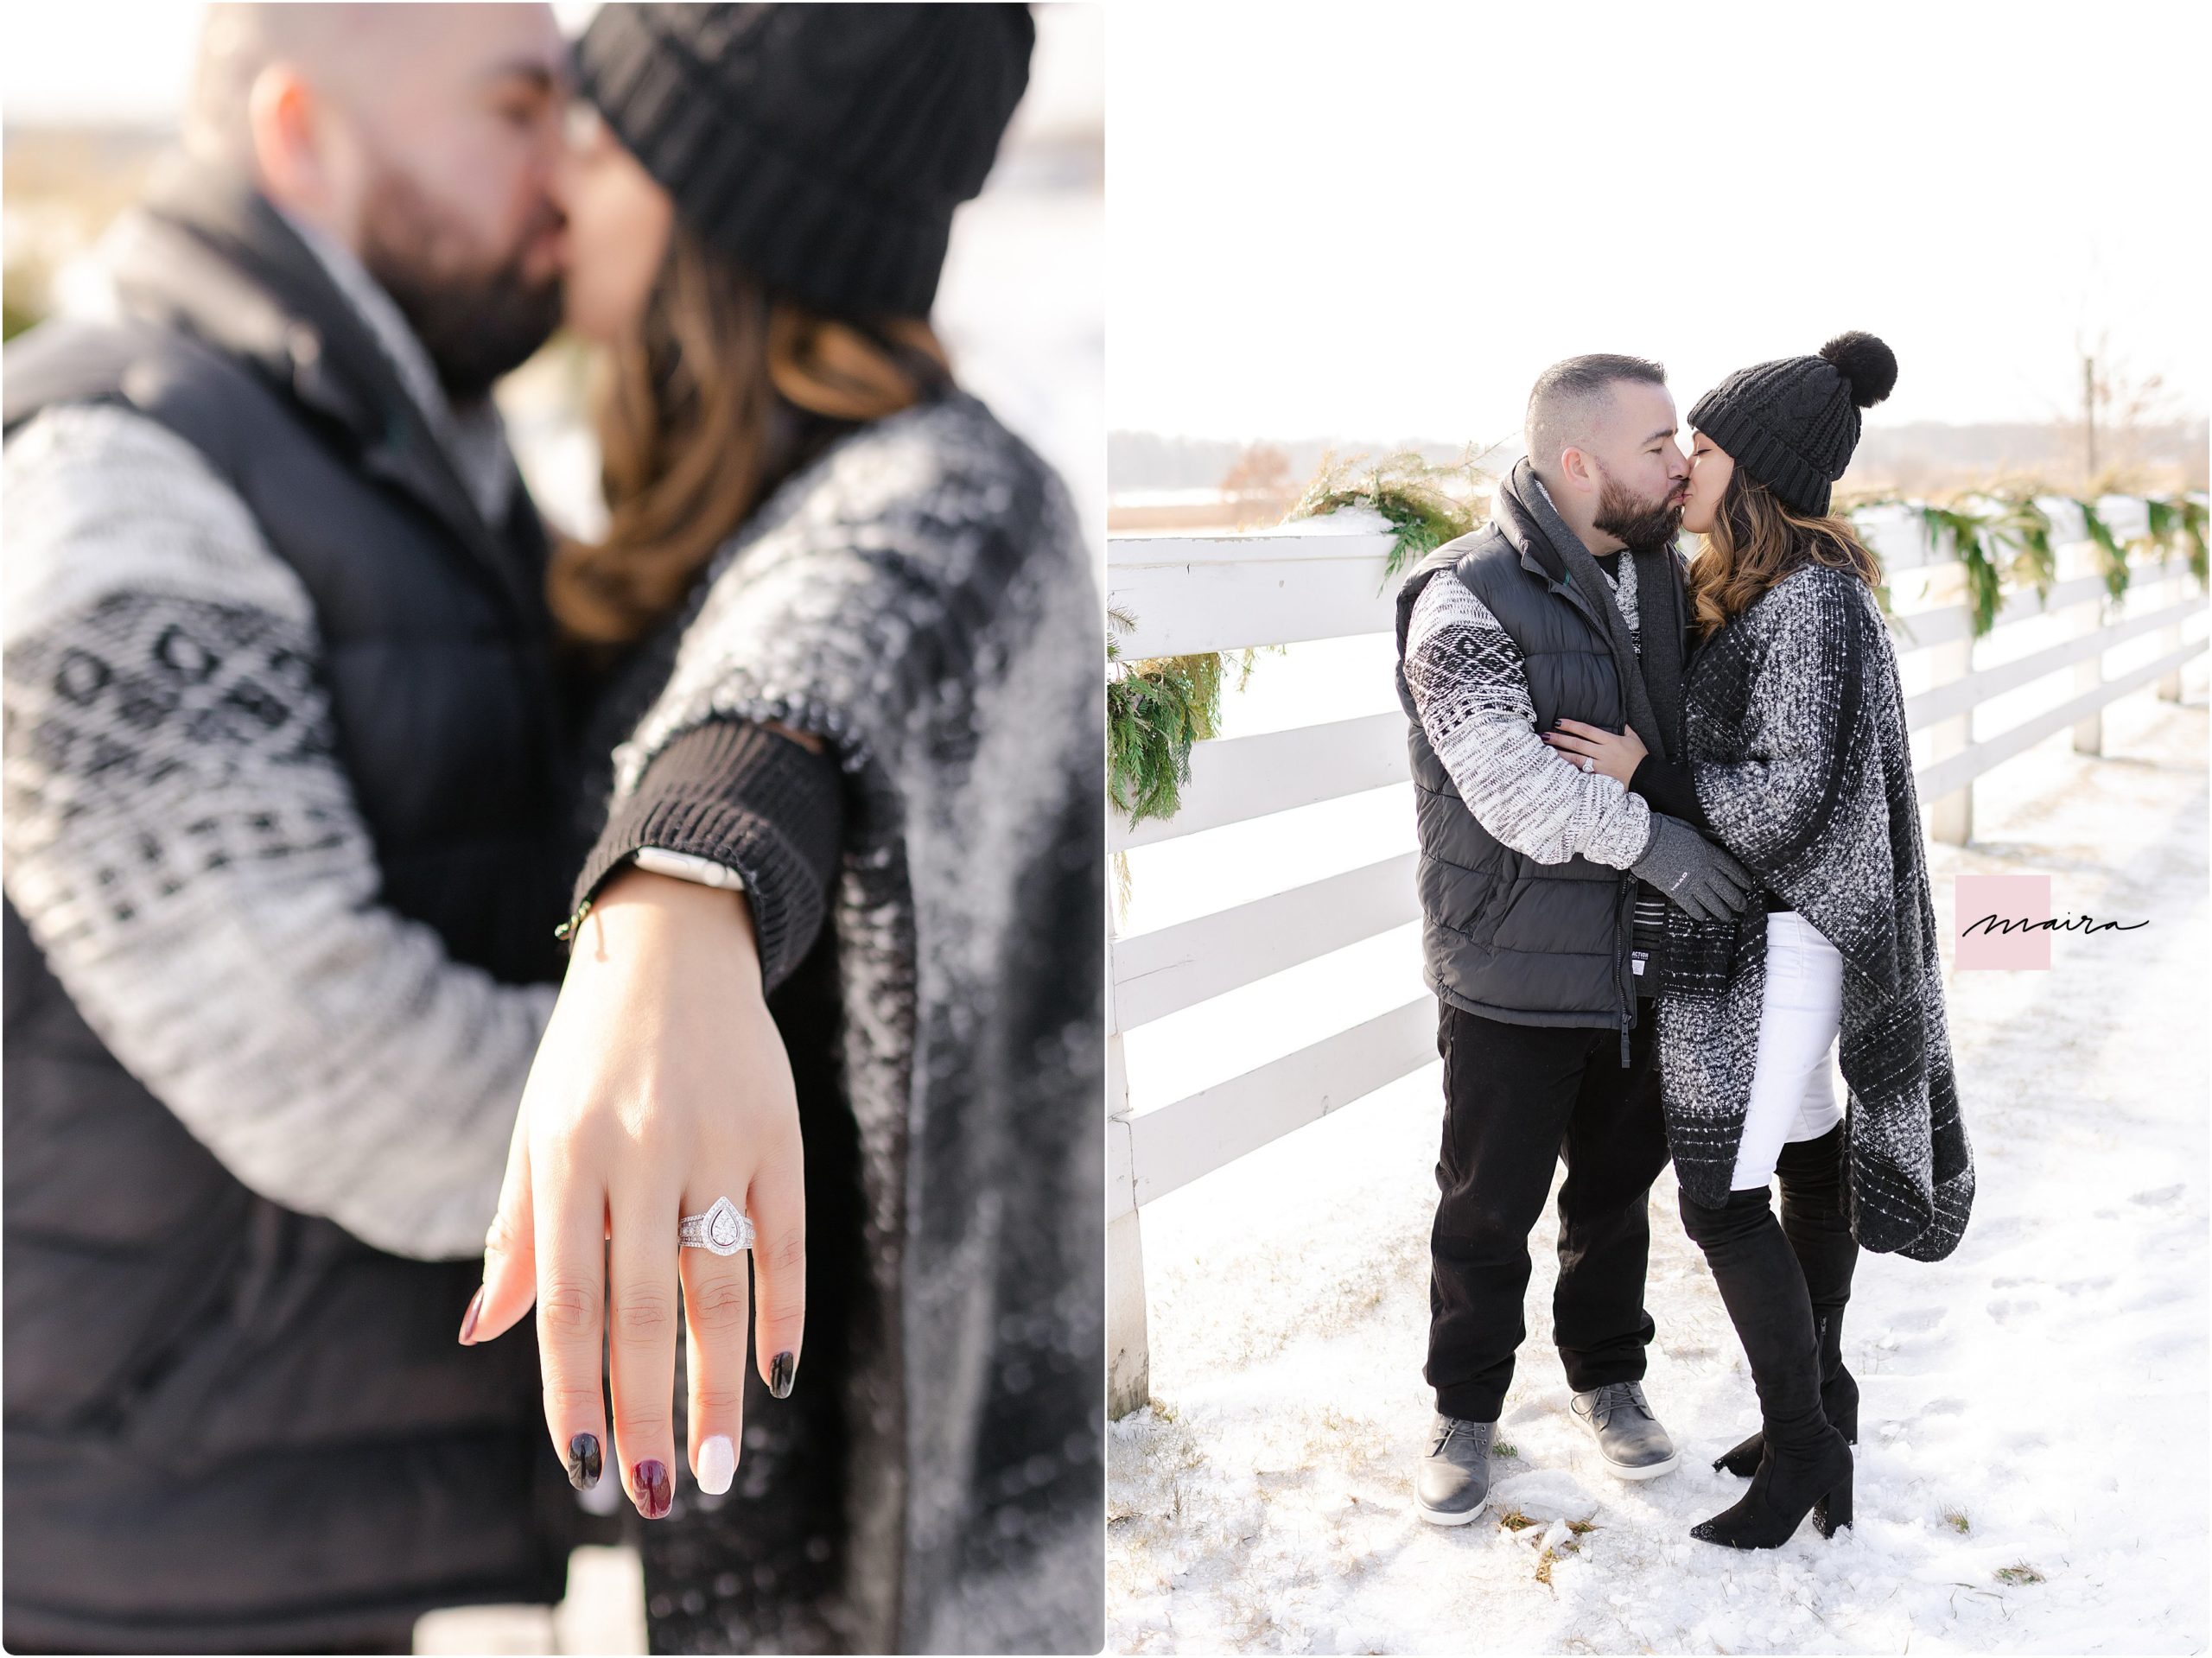 Cute Engagement Session, cute couple, Got engaged on Christmas 2020, Winter engagement photos shoot, Snow, Christmas themed engagement photos